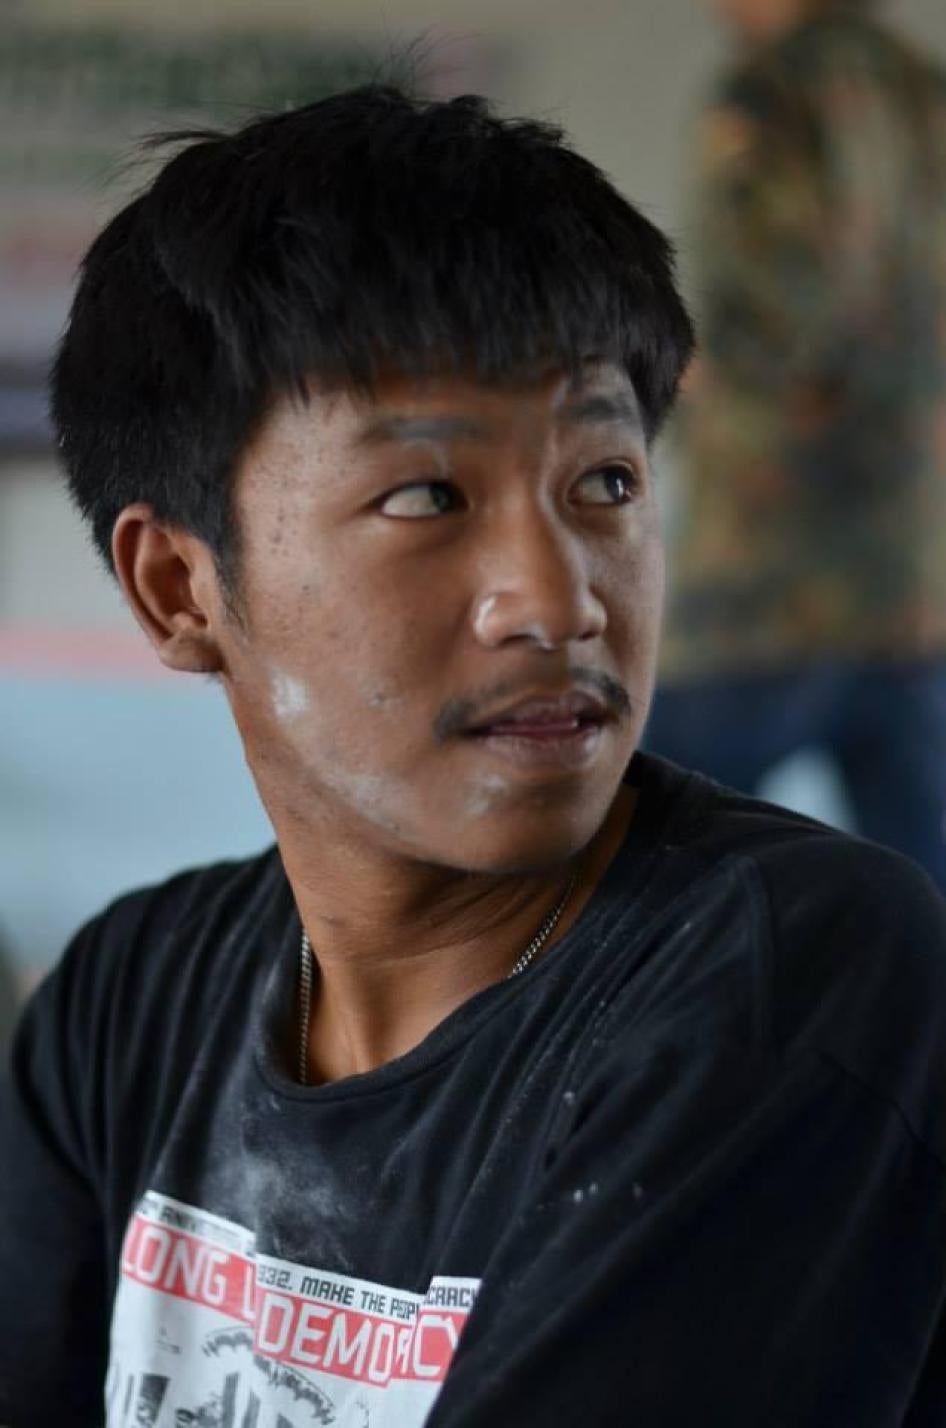 Student activist Jatupat Boonphatthararaksa has been on a hunger strike since he was detained on August 6, 2016.